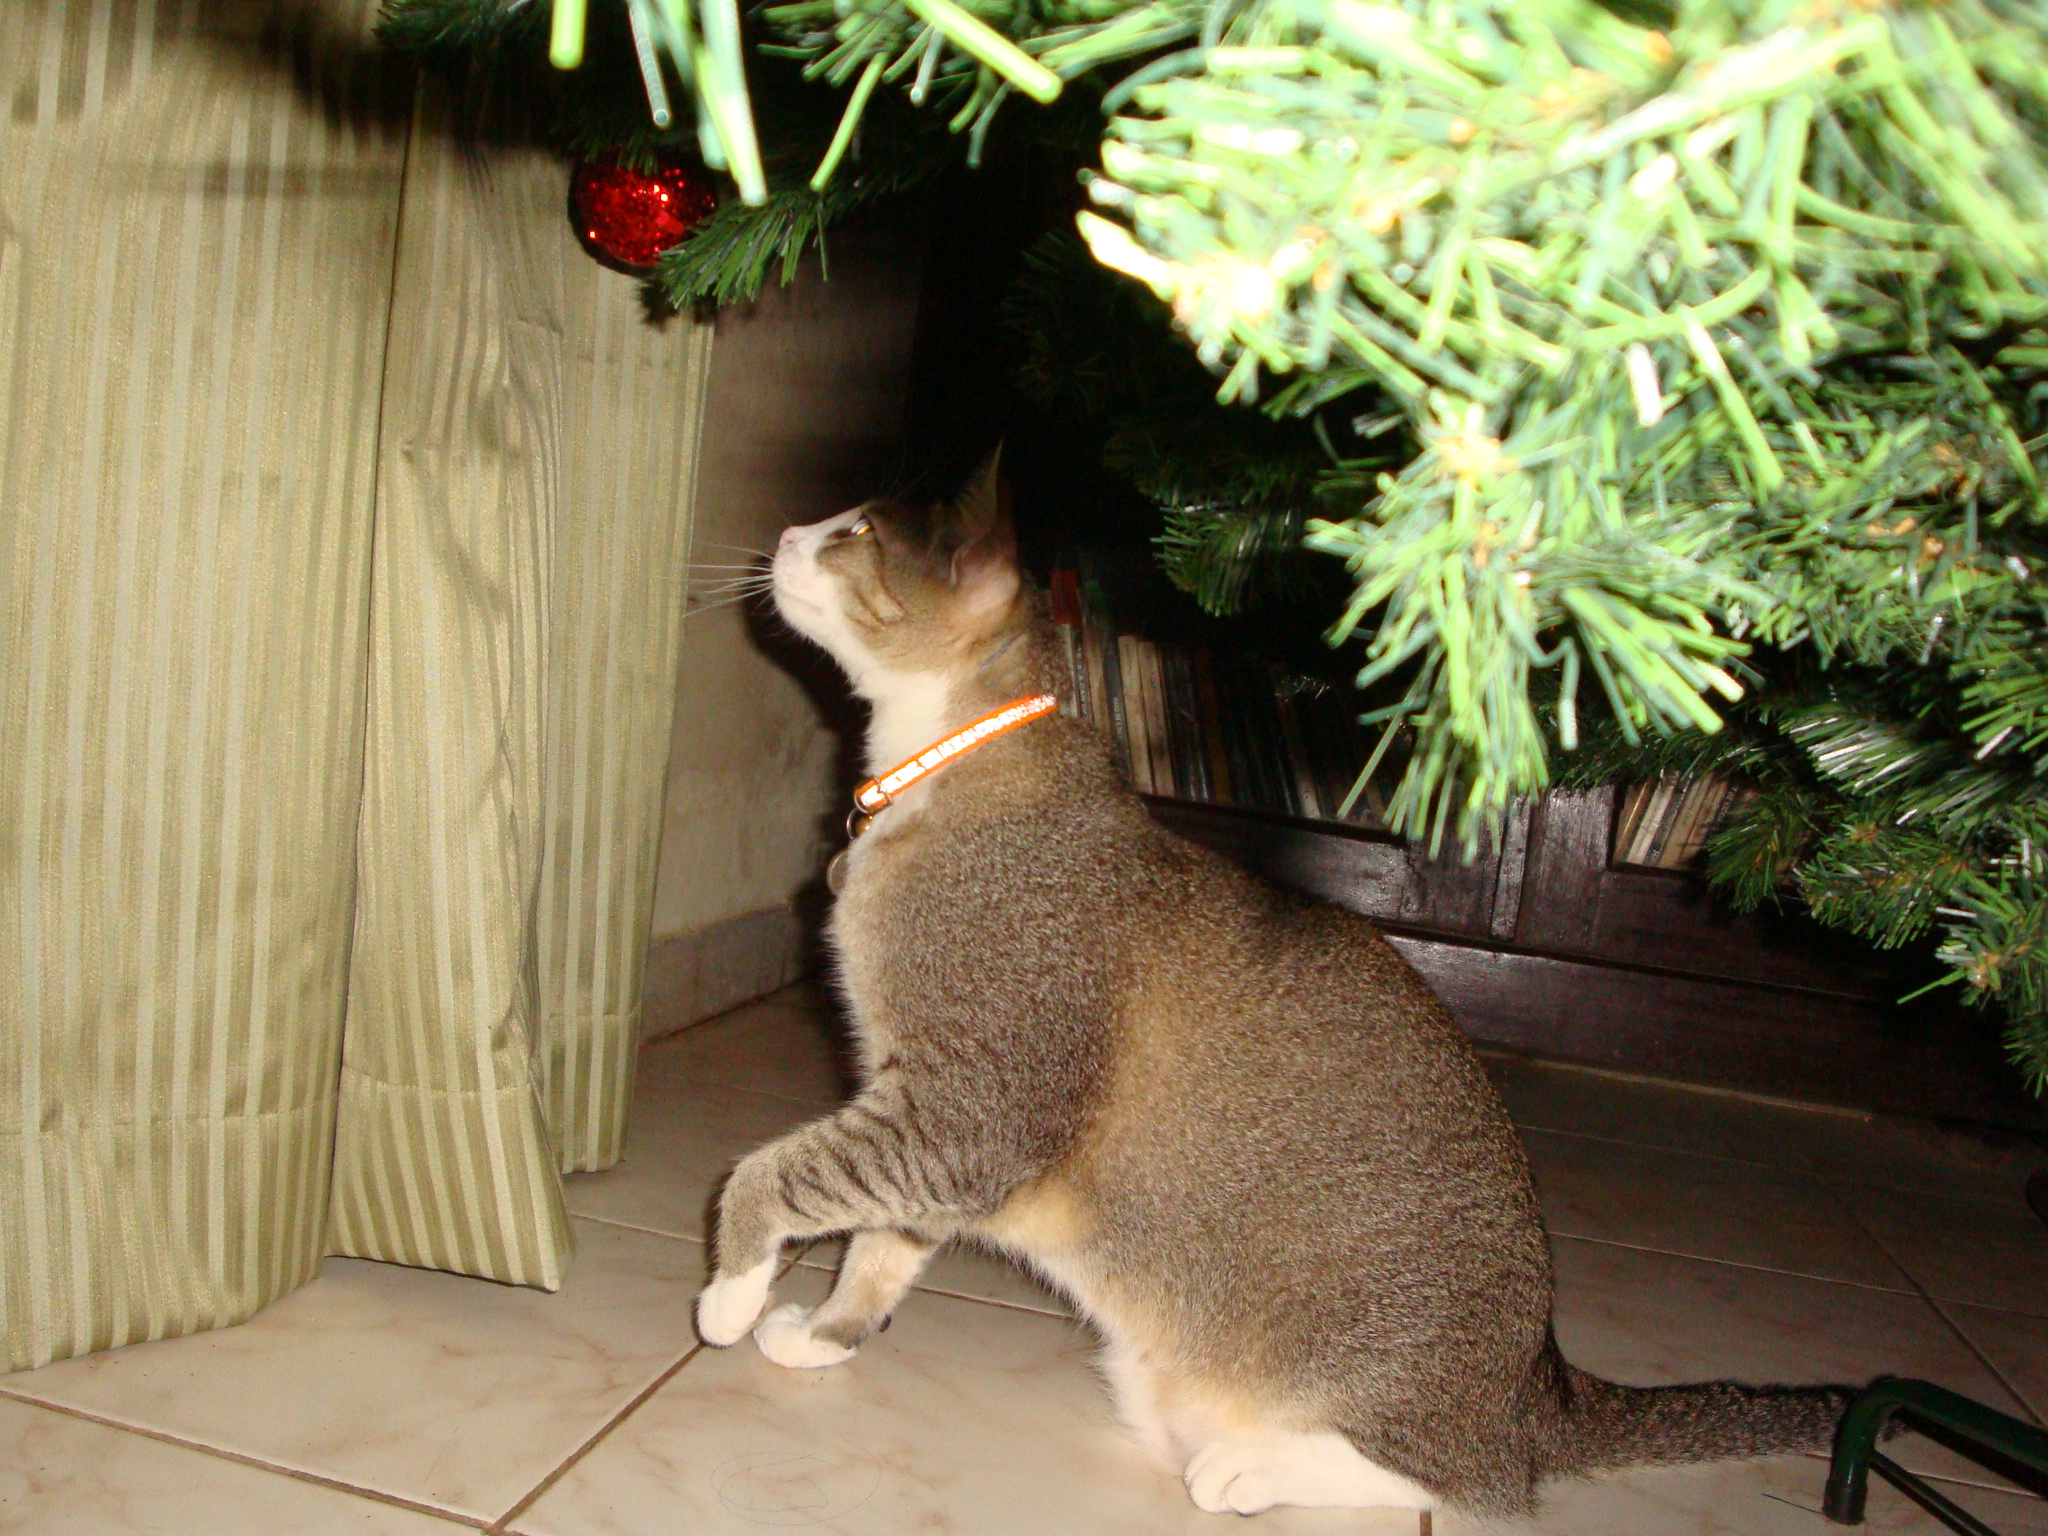 My sister's cat Lucifer investigates the quality of this year's tree at my mum's house.